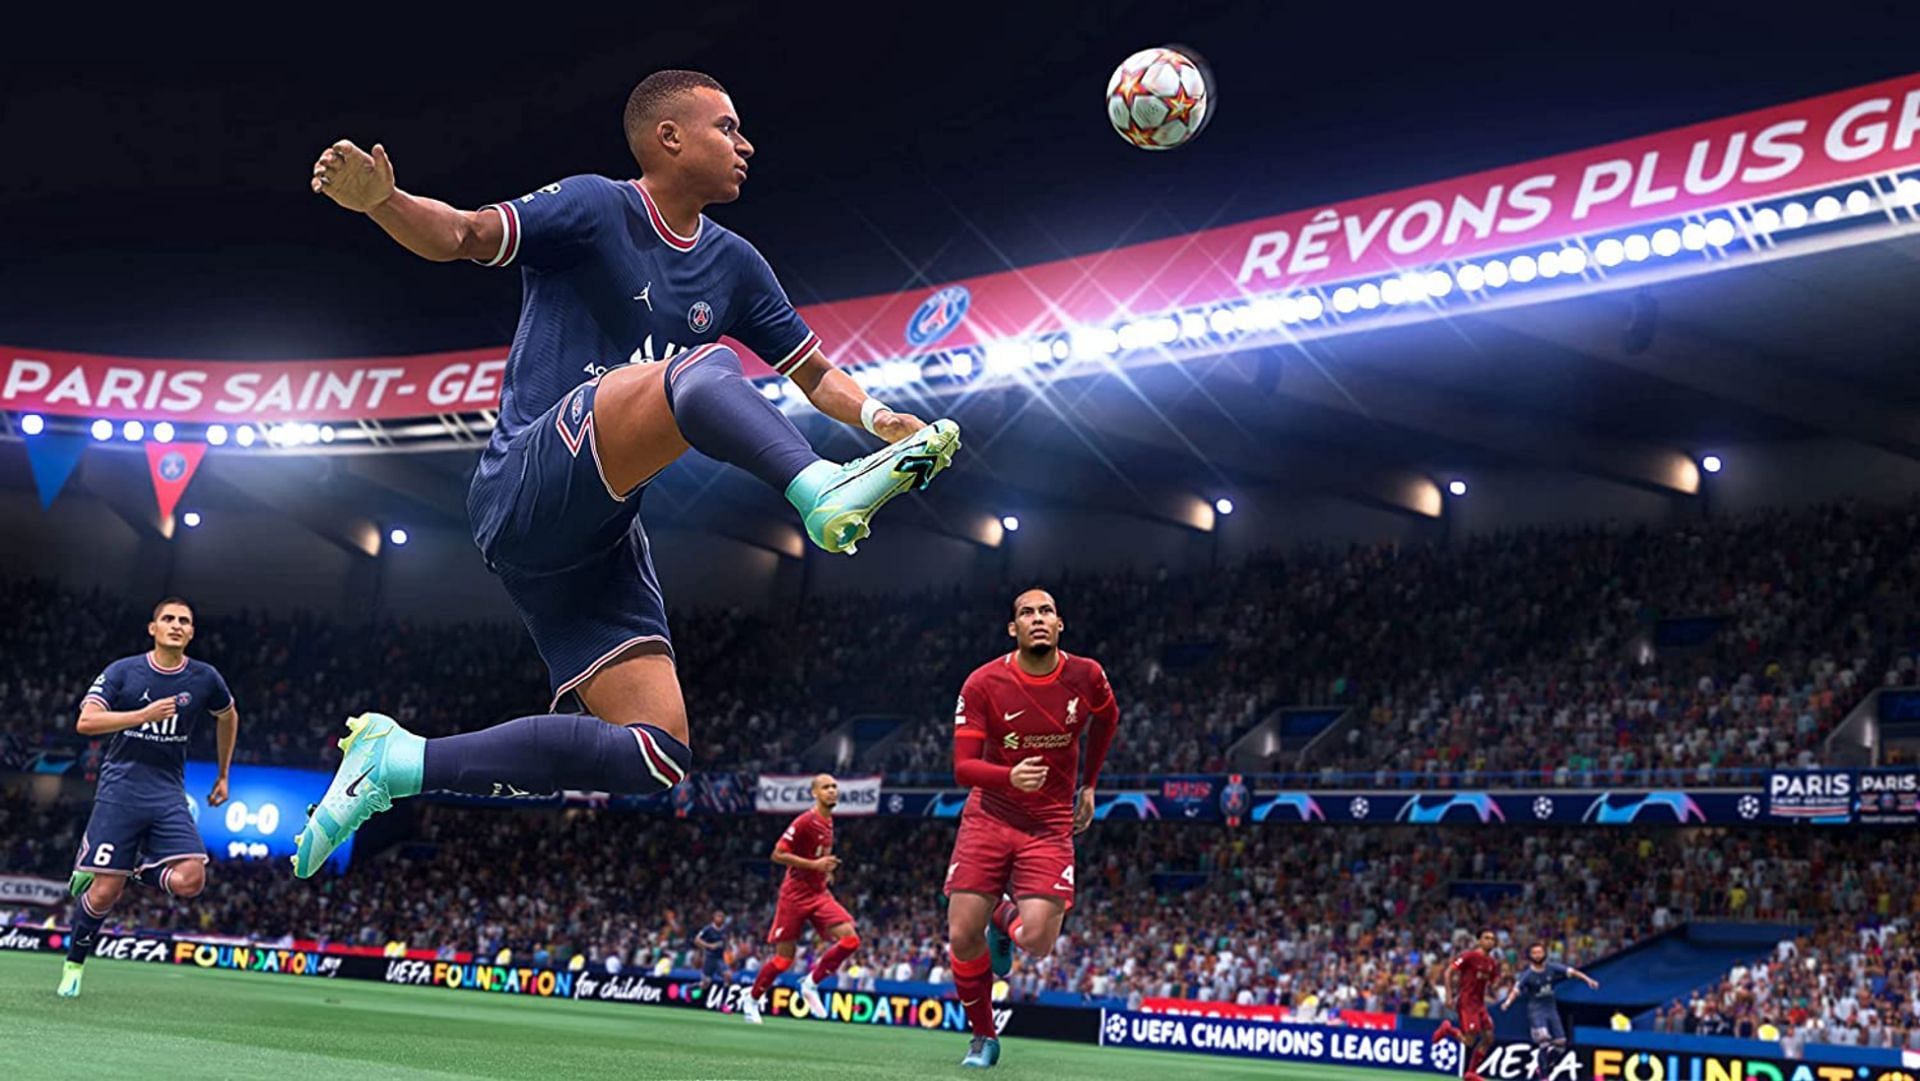 Mbappe will likely be the best player in FIFA 23 (Image via EA Sports)